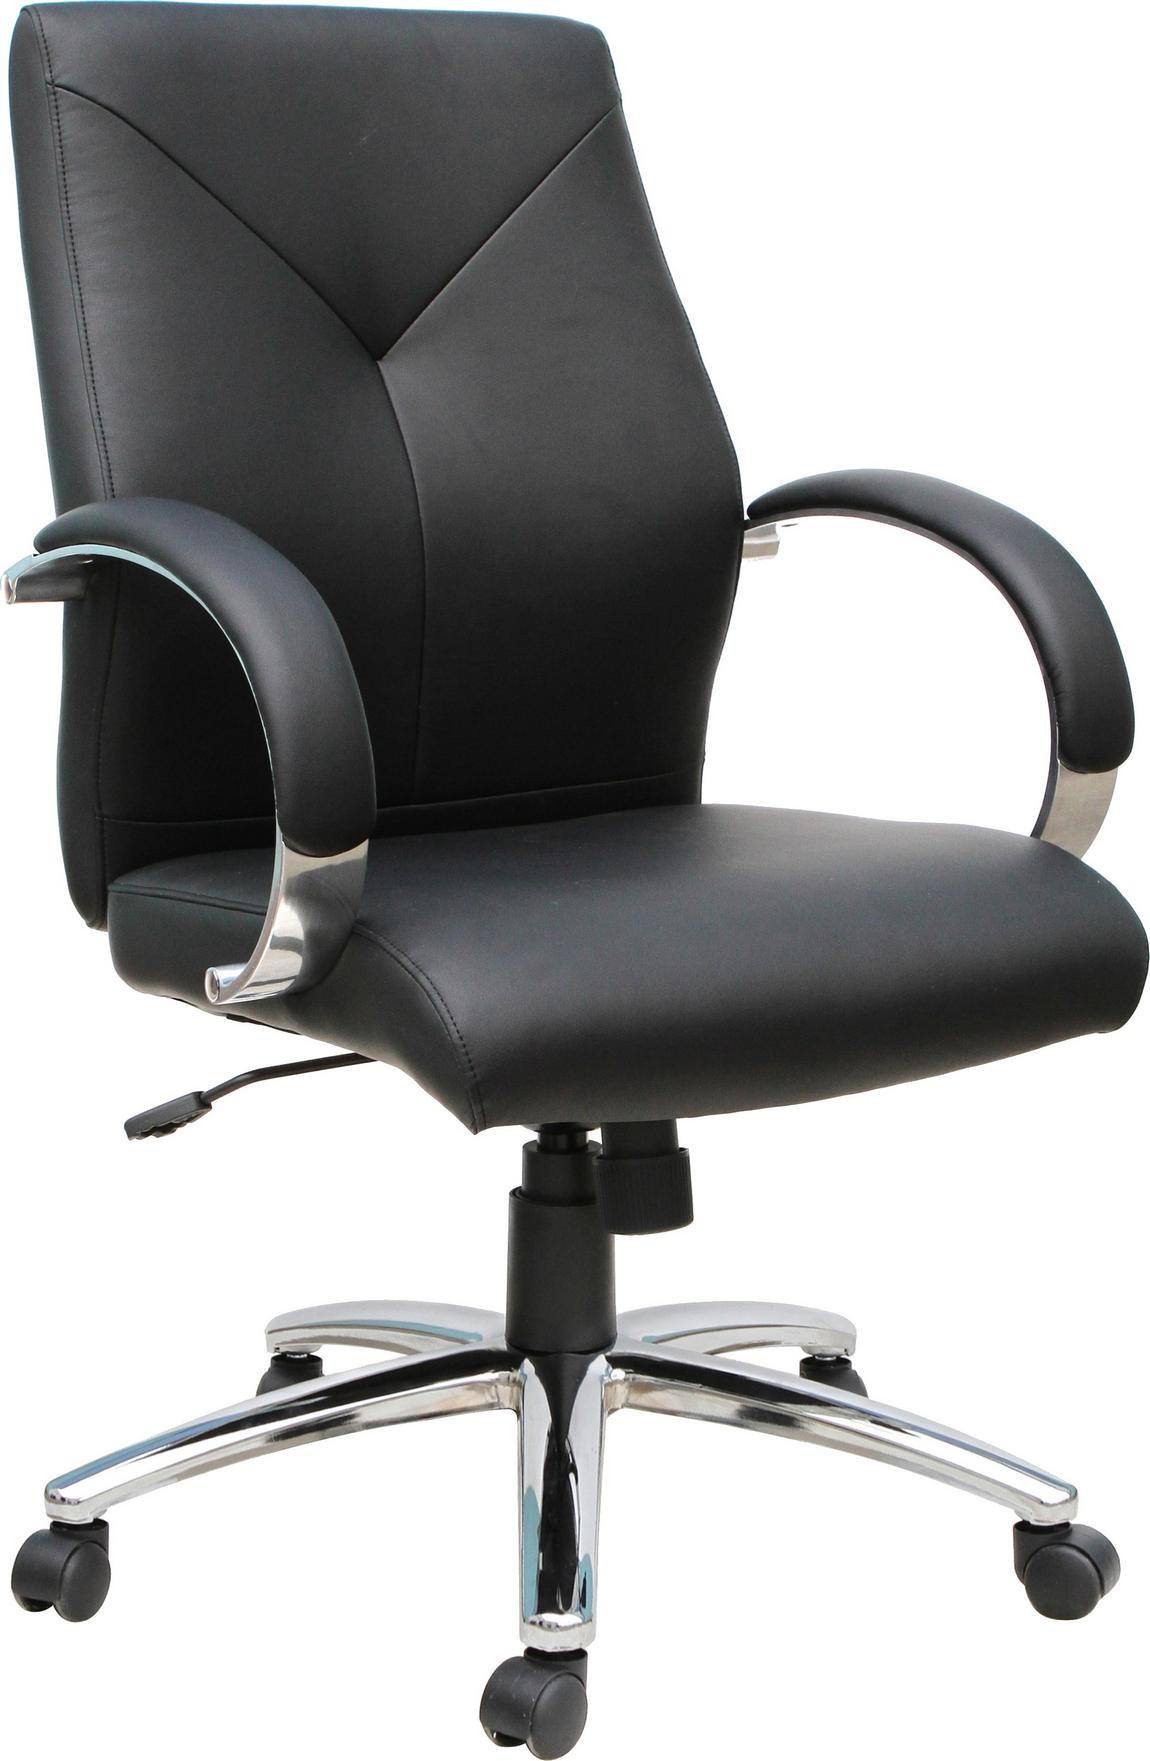 Black Modern Conference Room Chair with Arms | Madison Liquidators